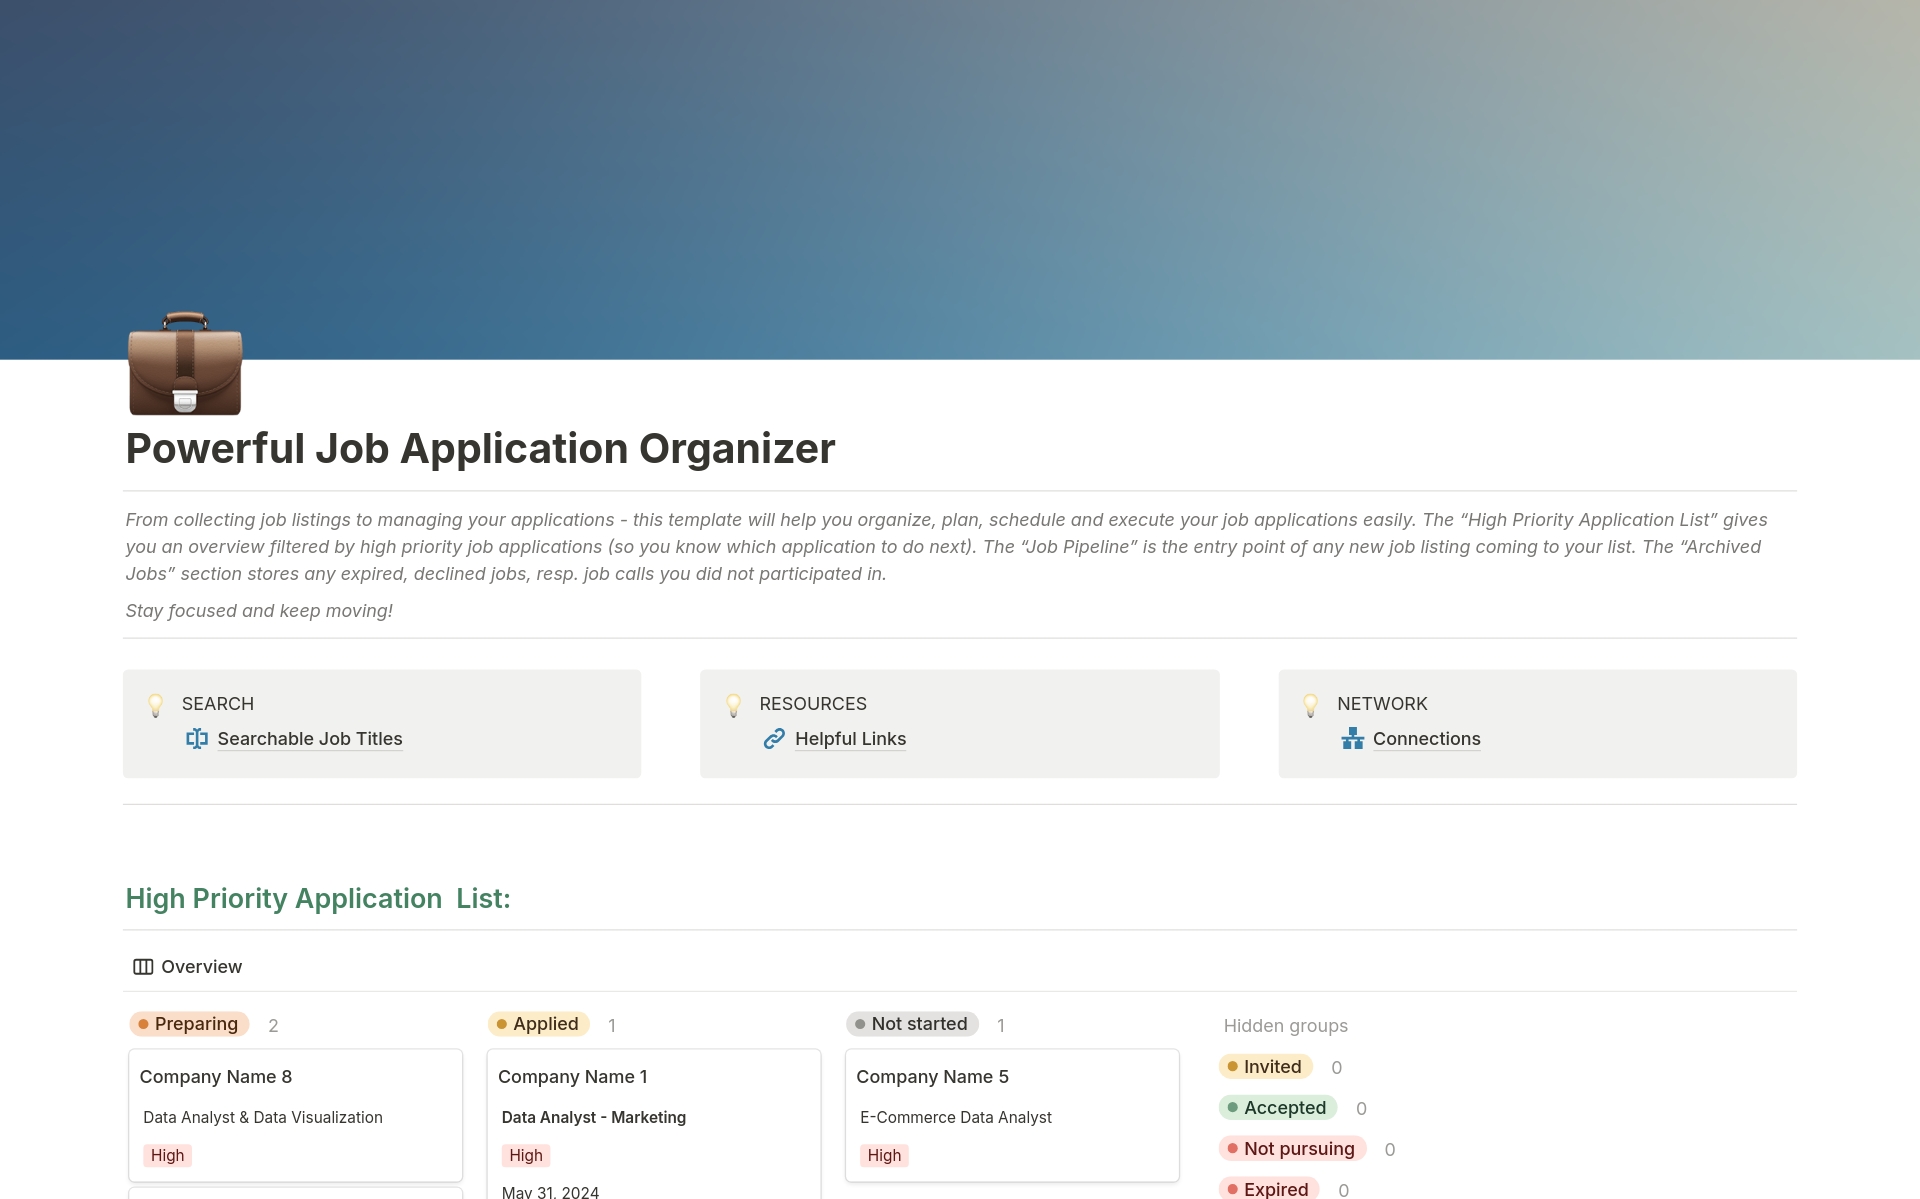 From collecting job listings to managing your applications - this template will help you organize, plan, schedule and execute your job applications easily. 